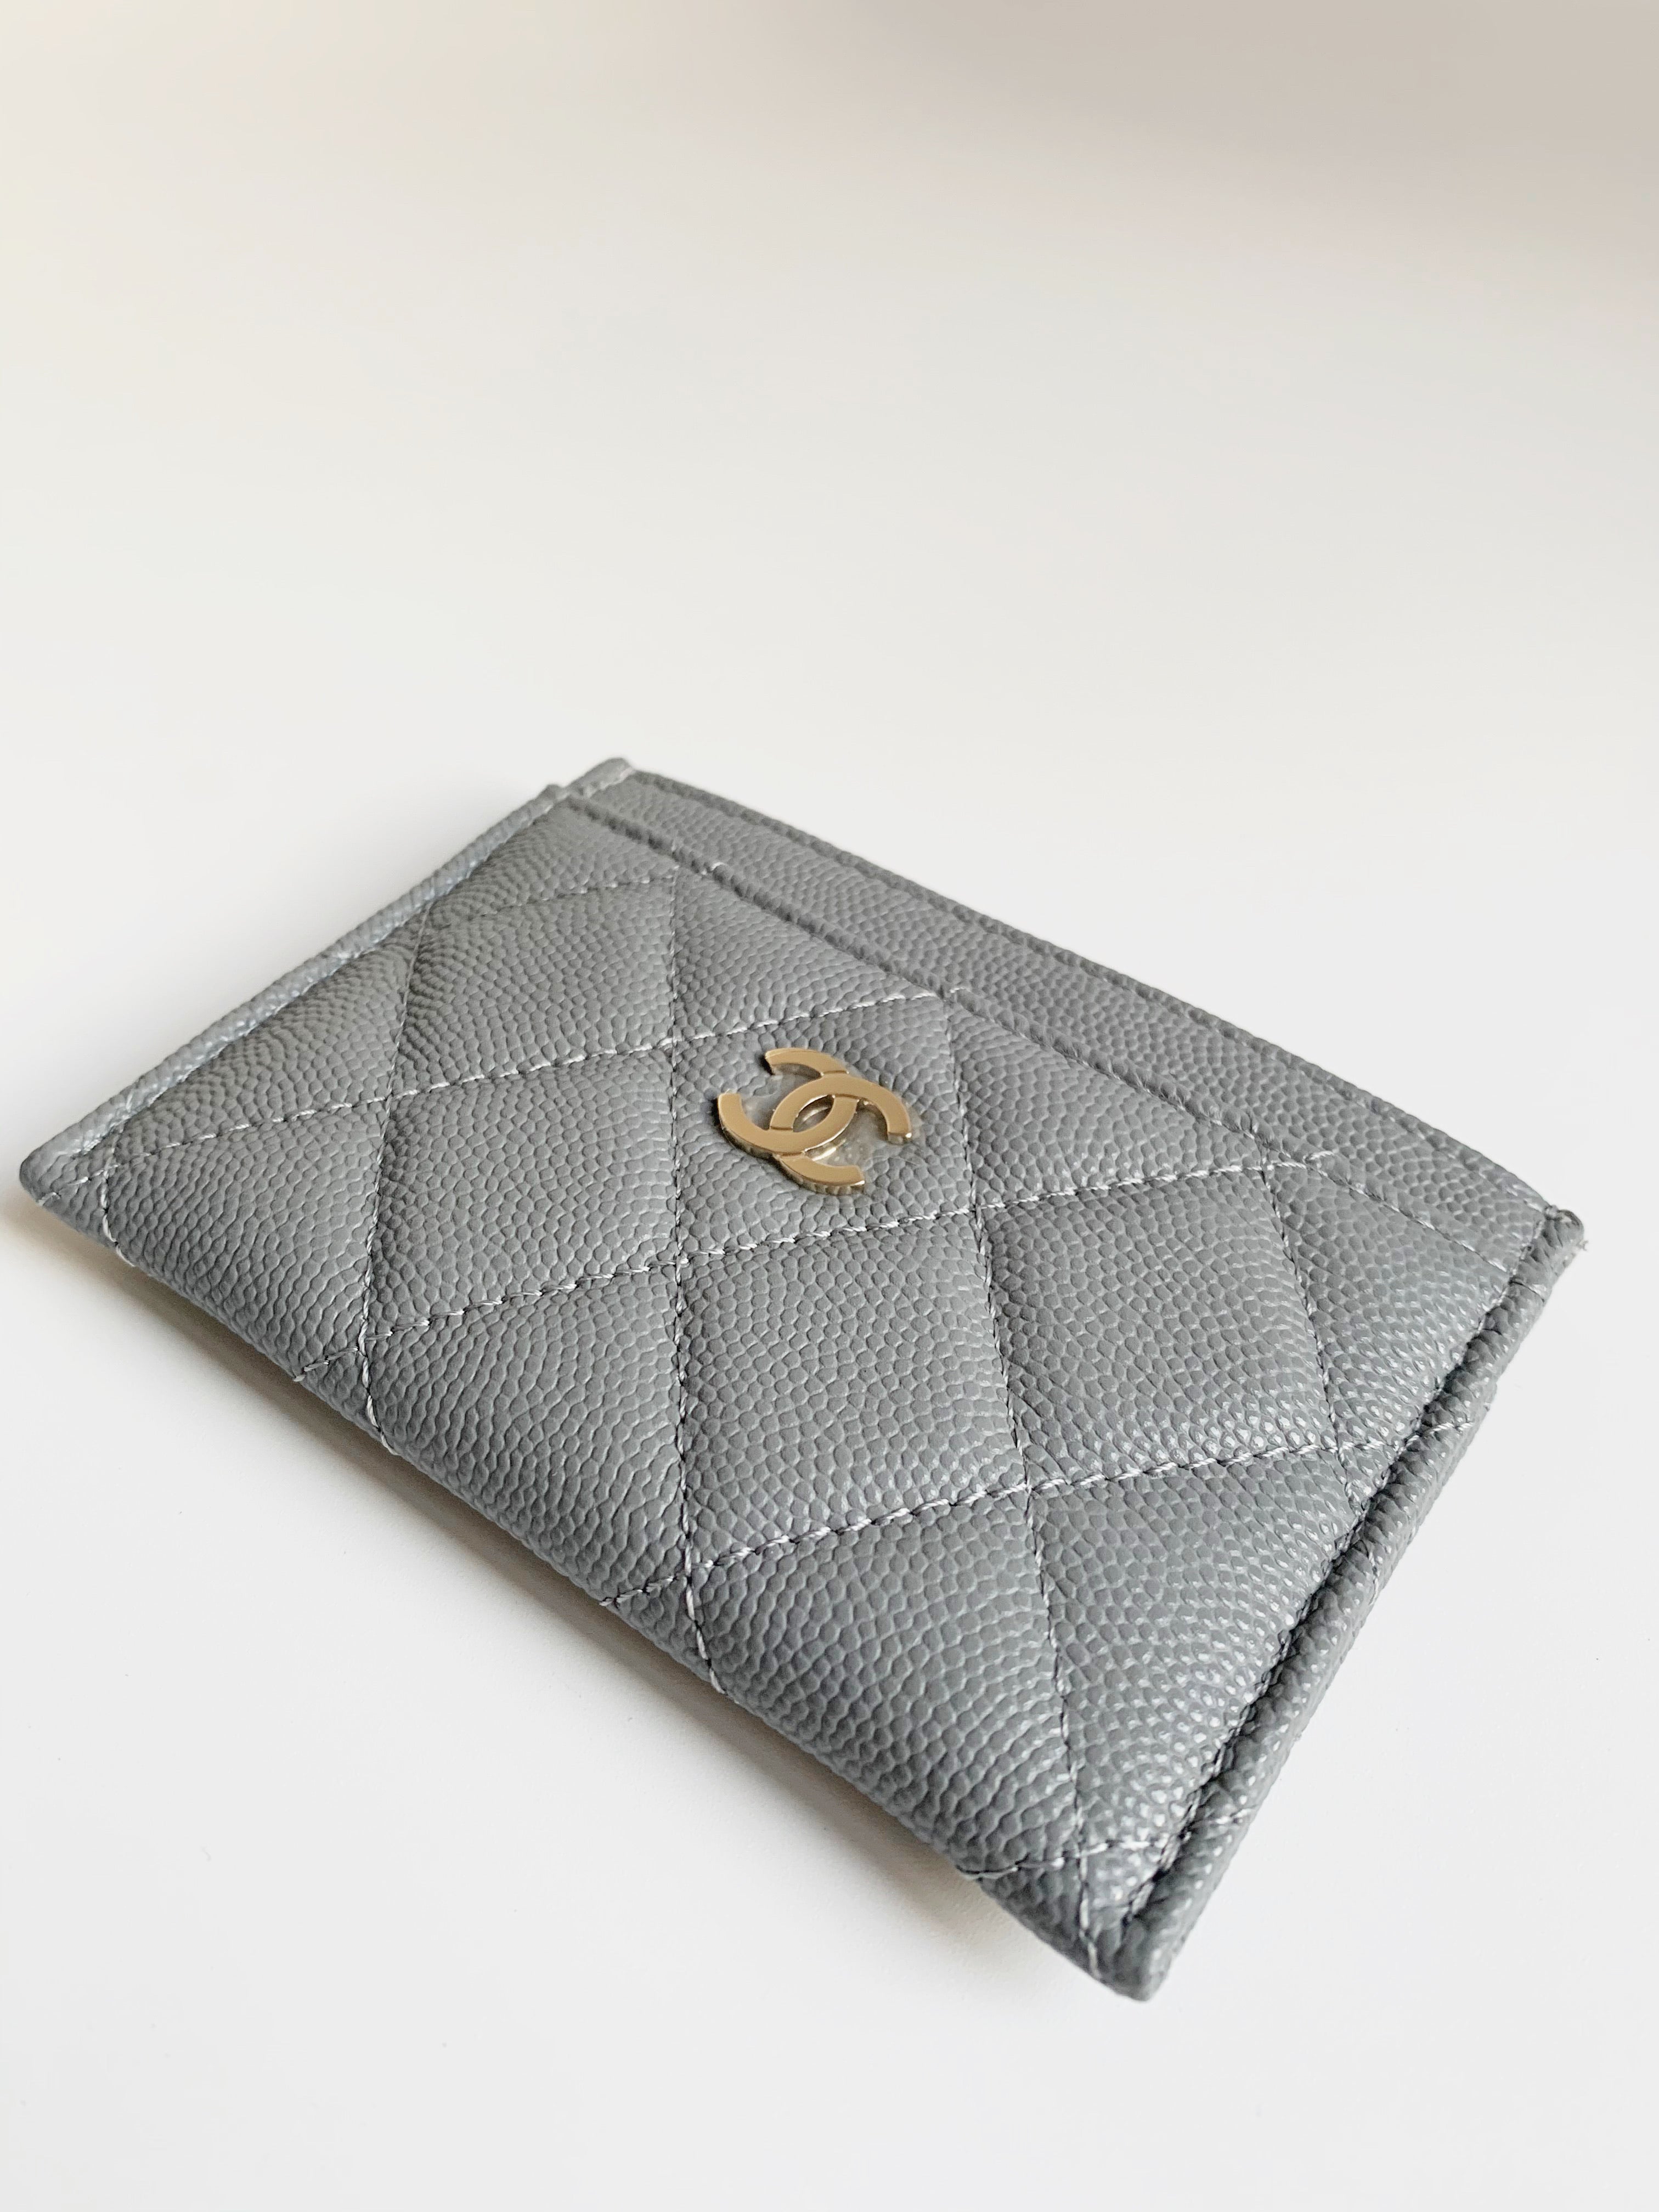 Chanel Quilted Caviar Flap Card Holder Chain Wristlet